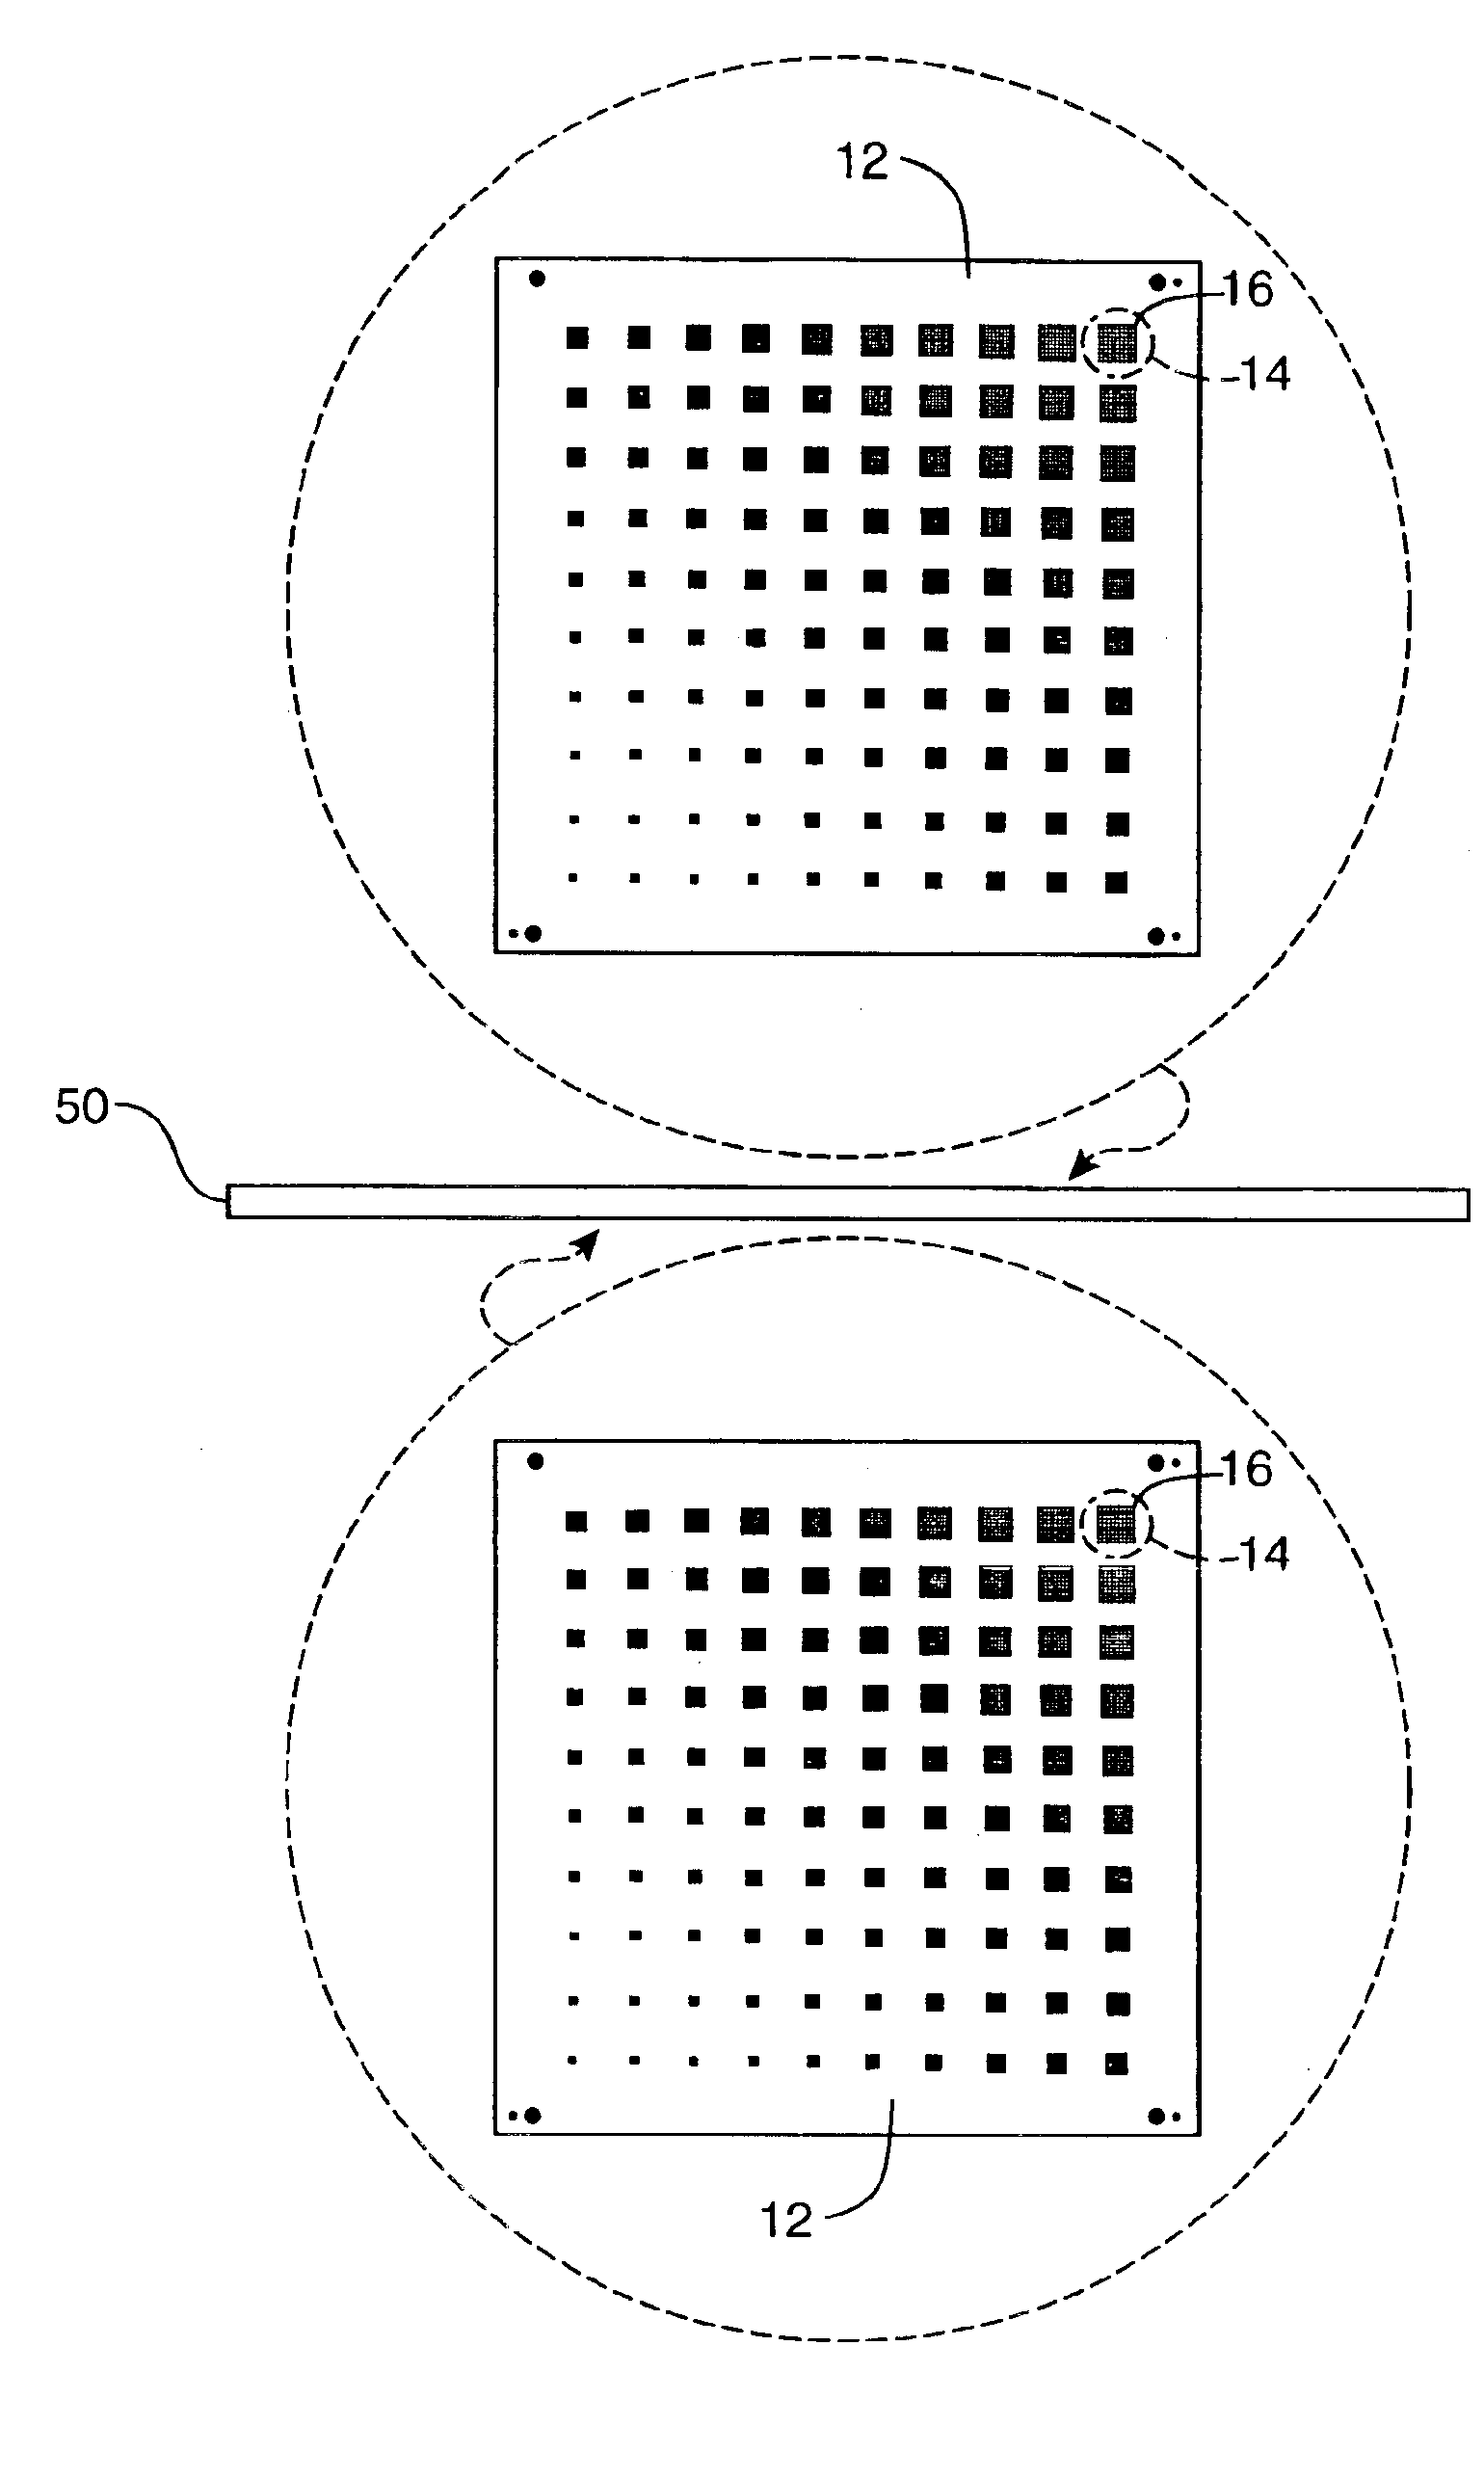 Surface mount technology evaluation board having varied board pad characteristics